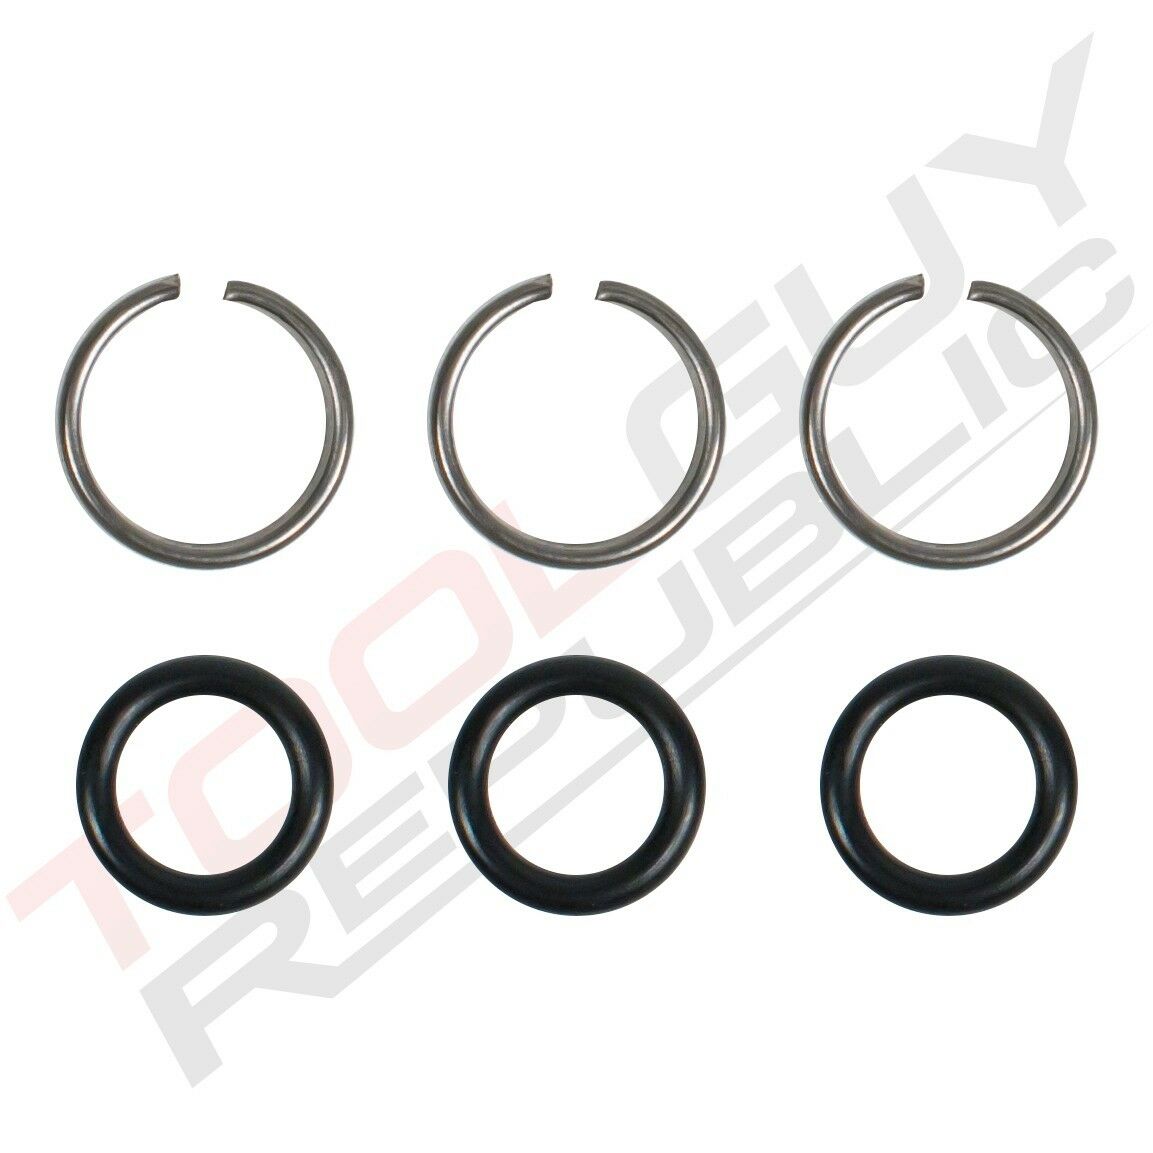 1/2" Impact Wrench Socket Retainer Retaining Ring With O-ring - 3 Sets